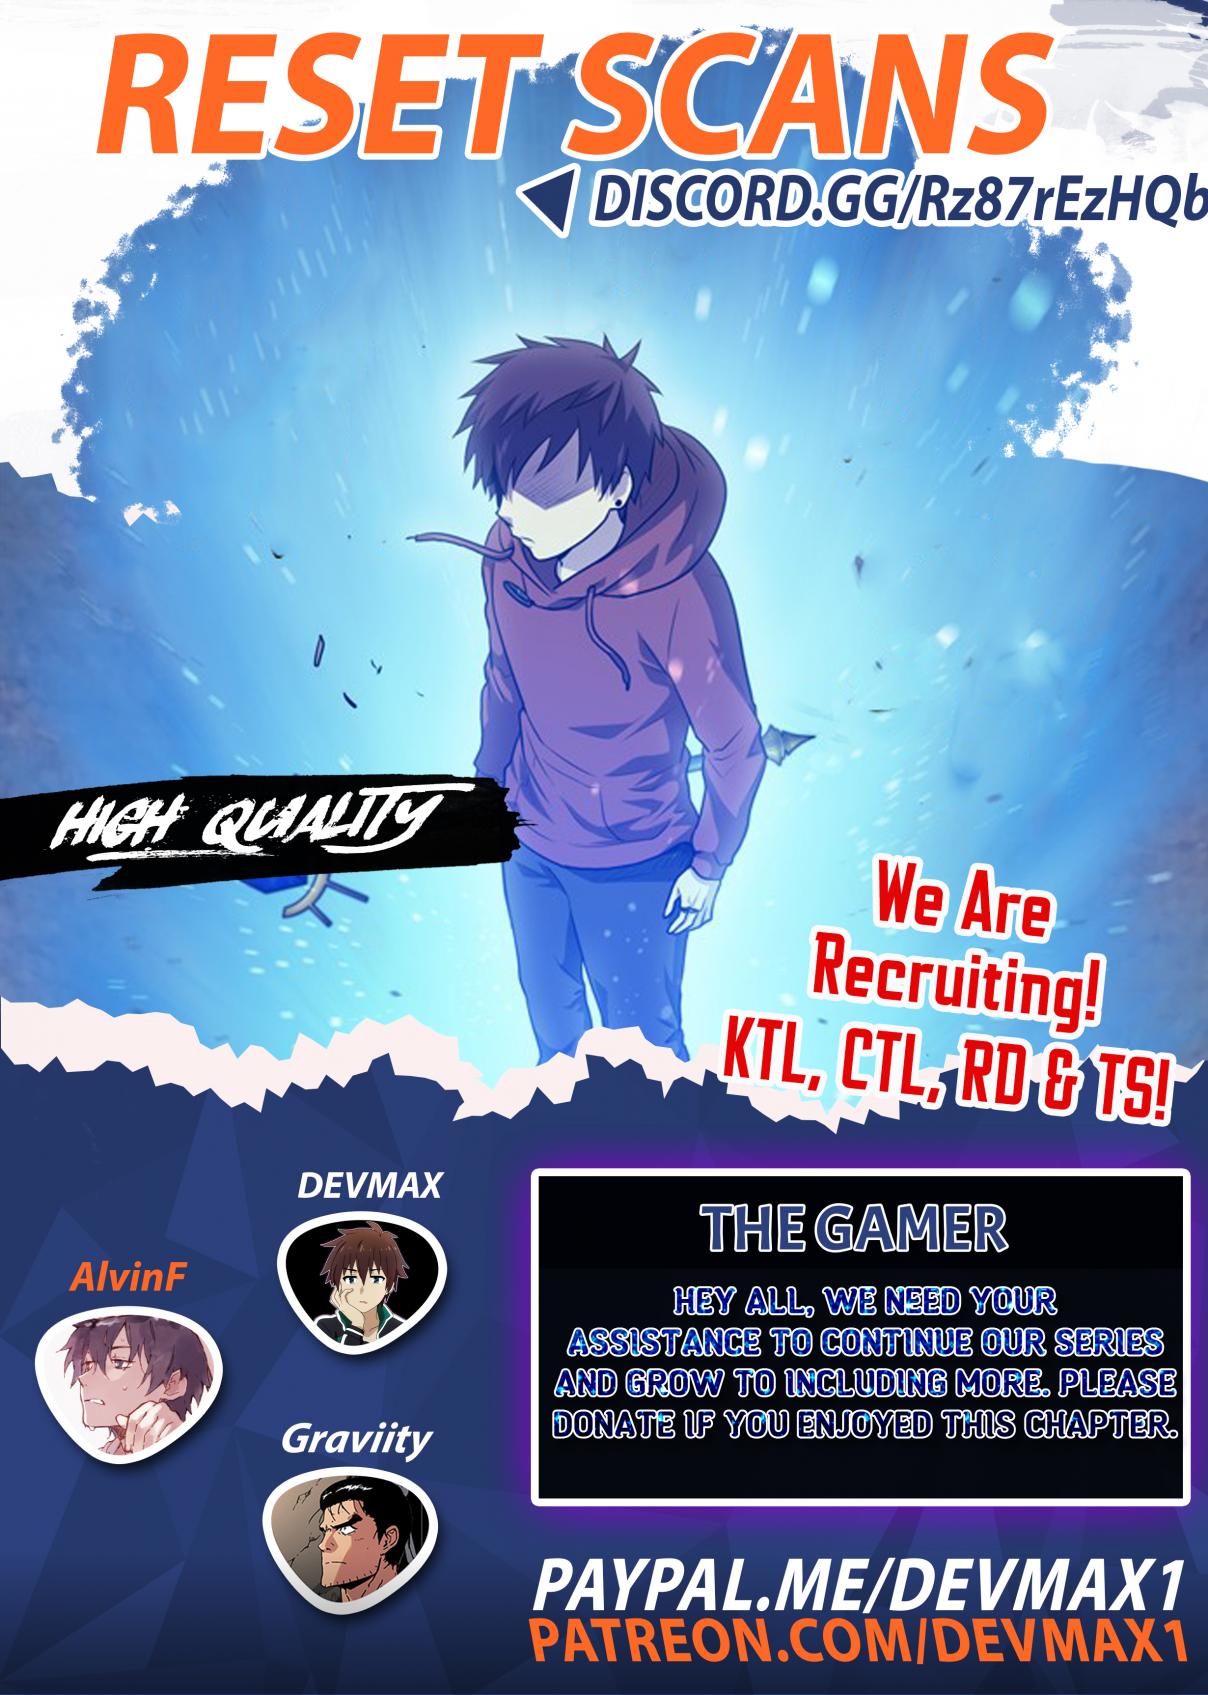 The Gamer Ch. 363 Season 5 Chapter 13